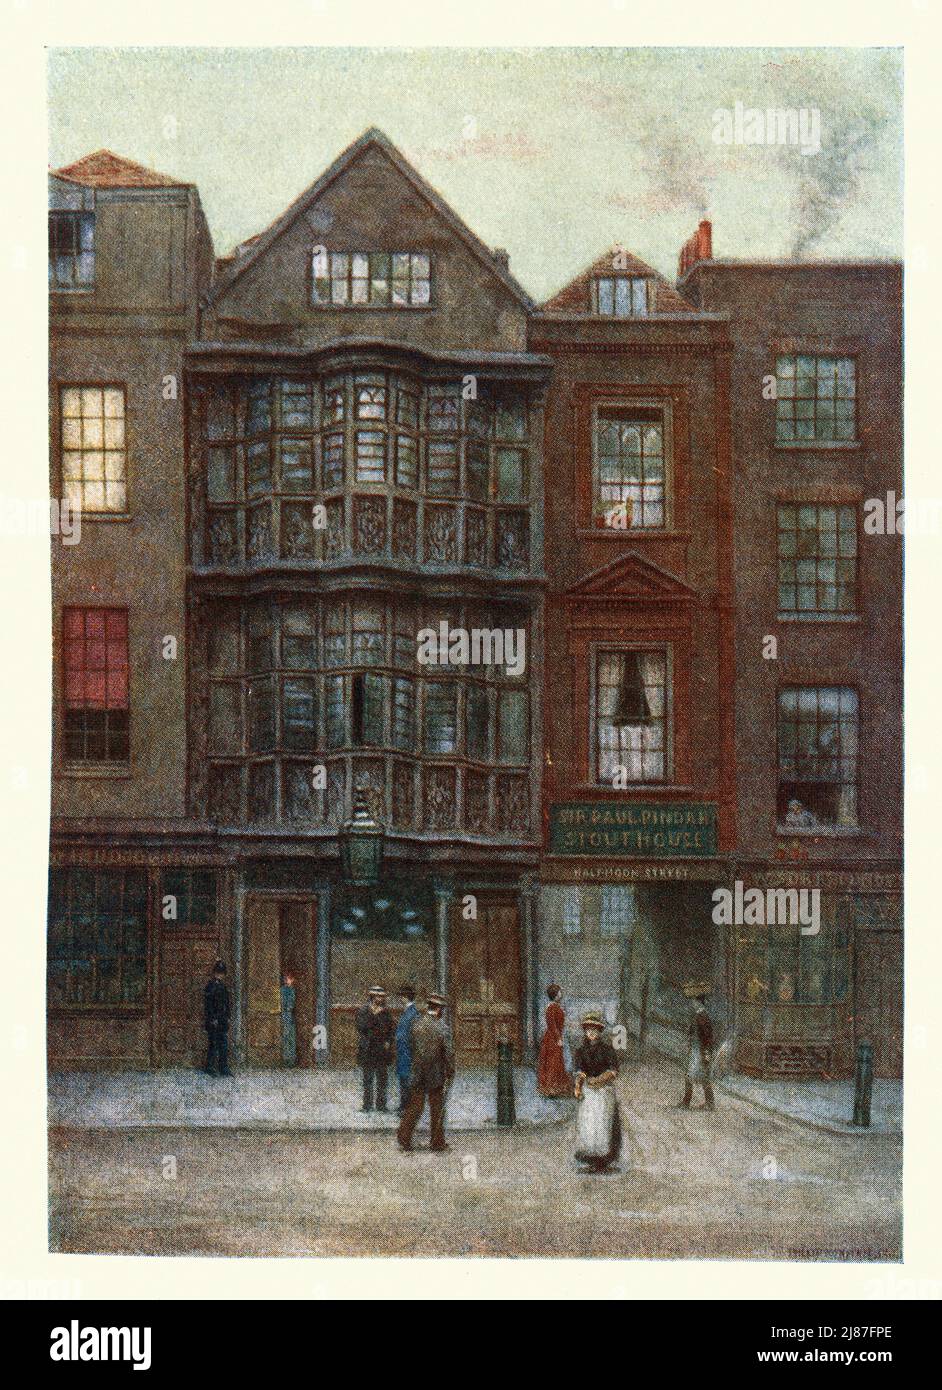 London's vanished architecture, Sir Paul Pindar's House, timber framed house, Bishopsgate Street, 1877, Philip Norman Stock Photo